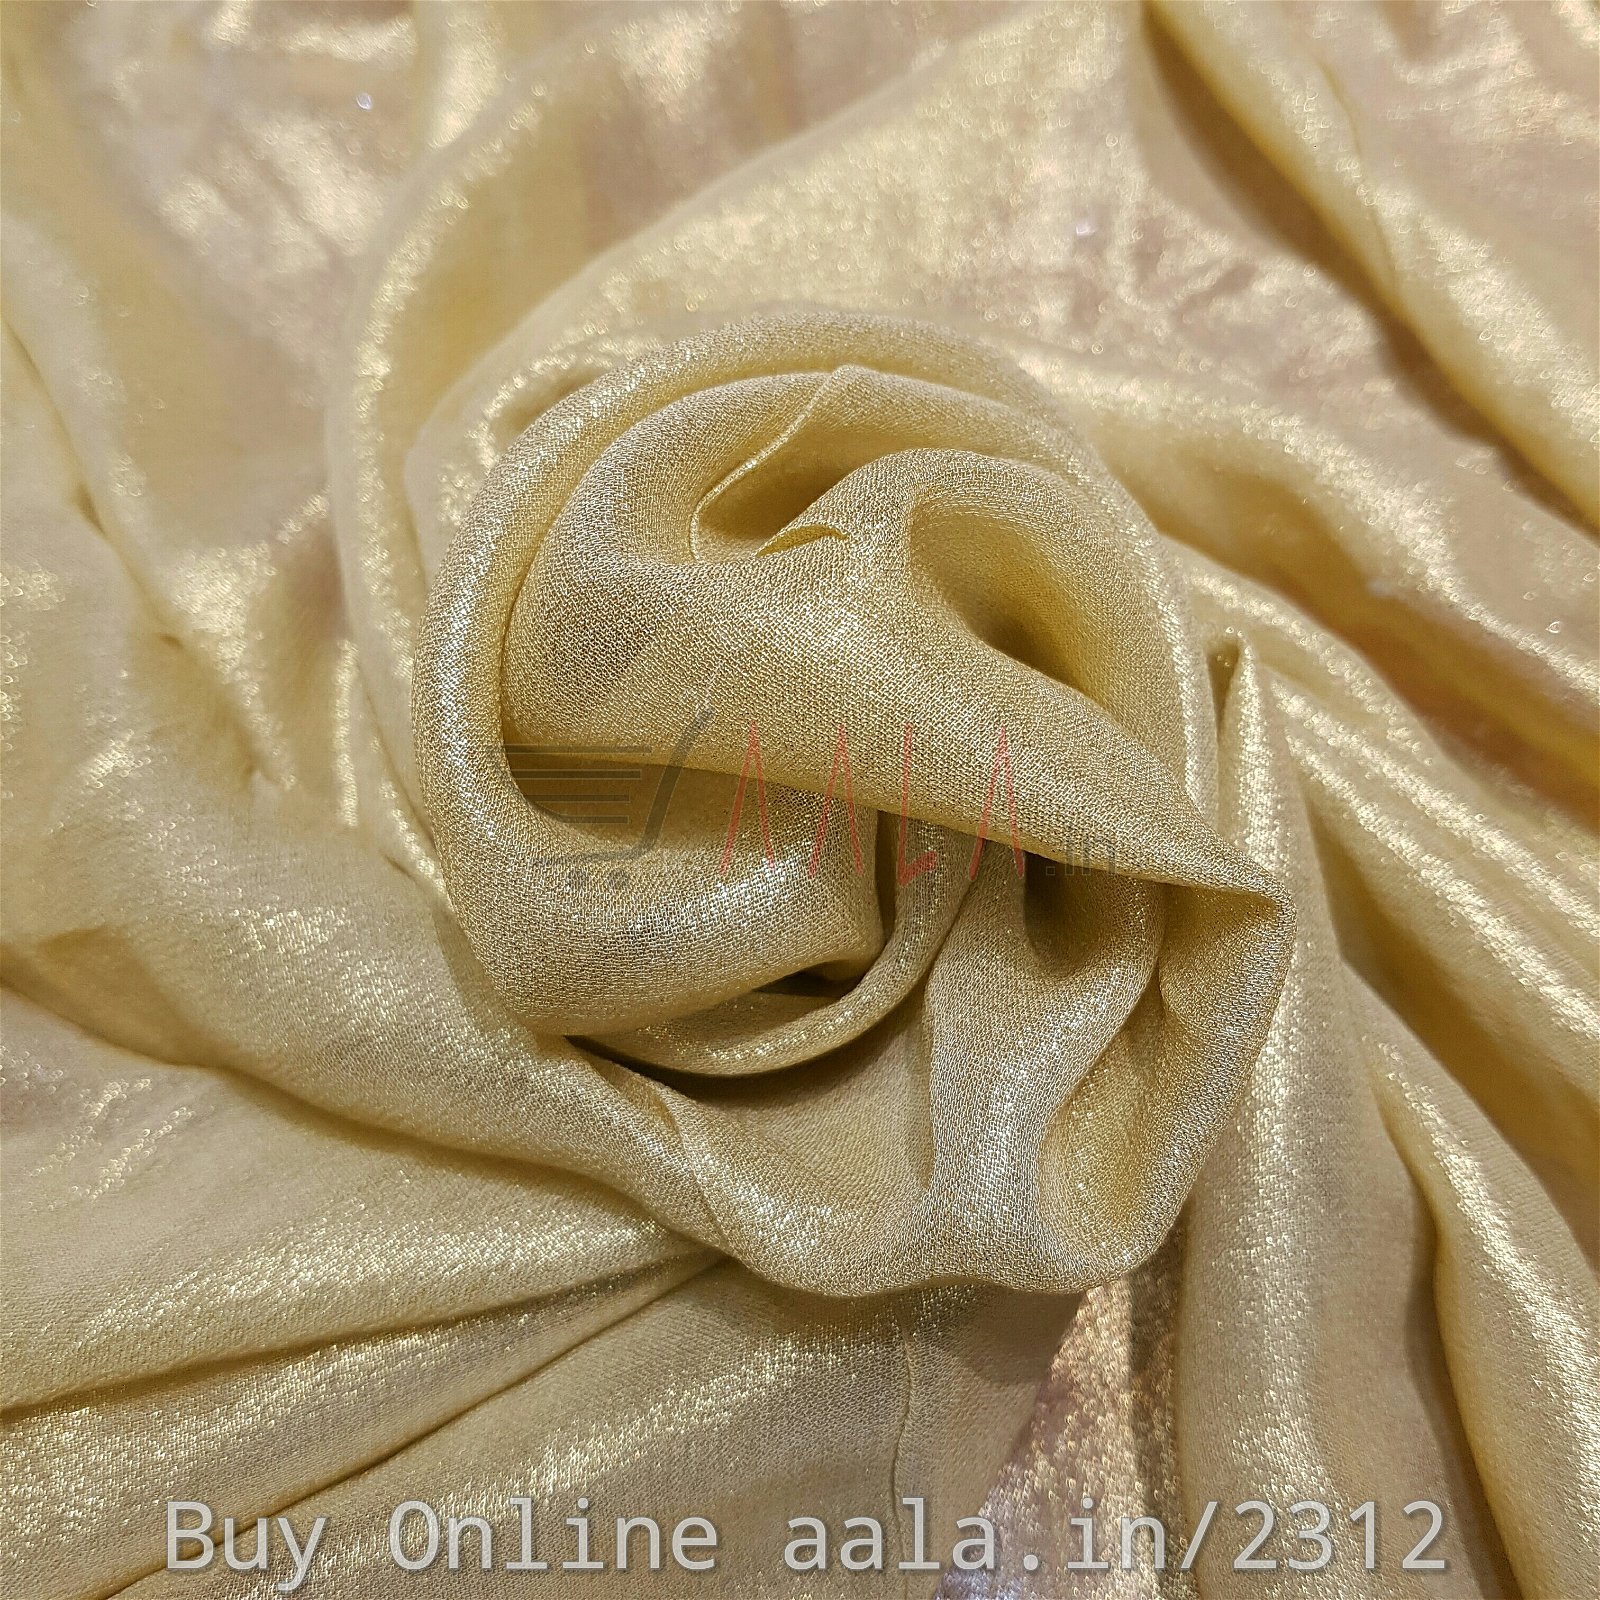 Foil Georgette Viscose 44 Inches Dyed Per Metre #2312